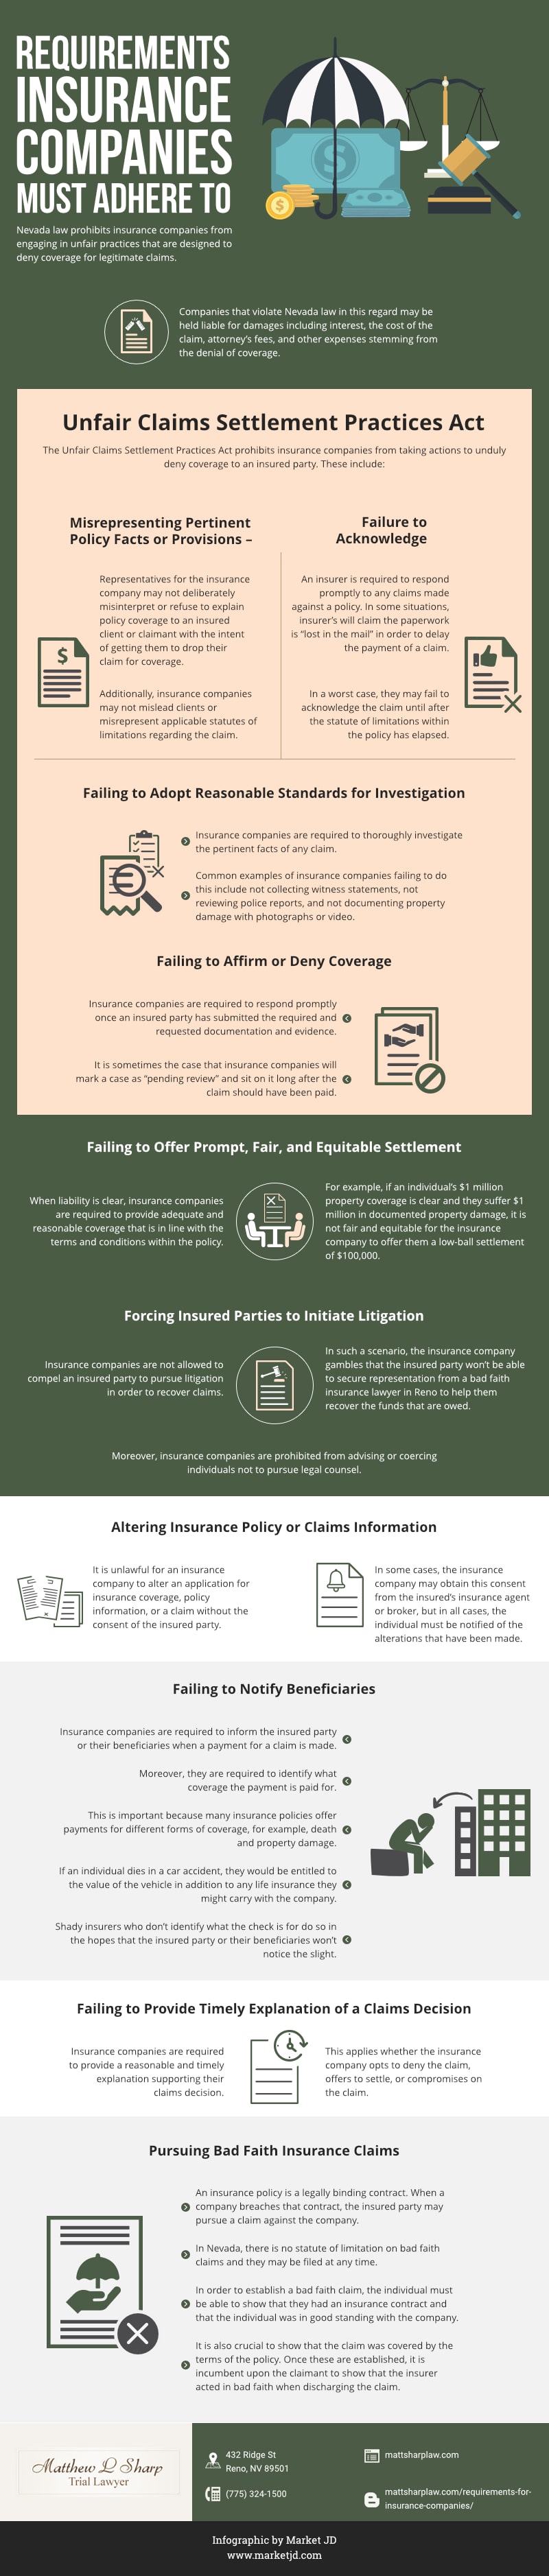 Insurance Company Requirements_bad faith insurance lawyer reno_infographic